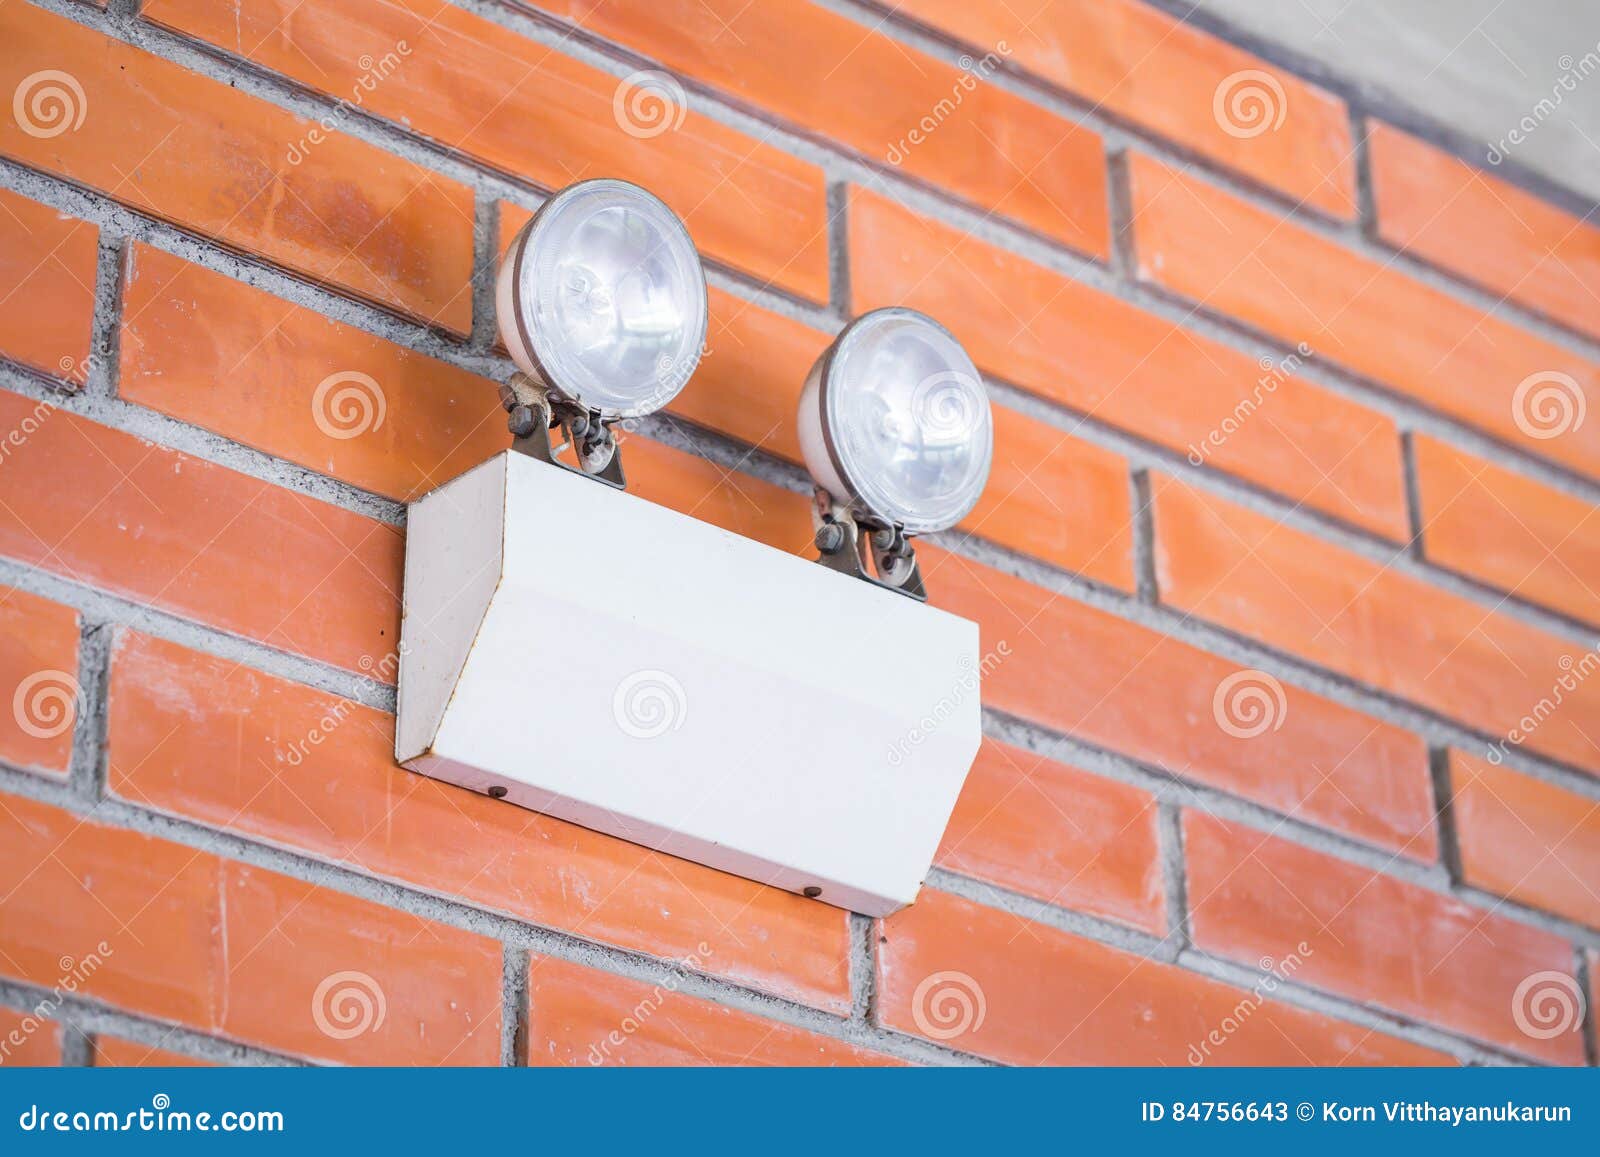 https://thumbs.dreamstime.com/z/emergency-light-auto-lighting-working-power-outage-battery-84756643.jpg